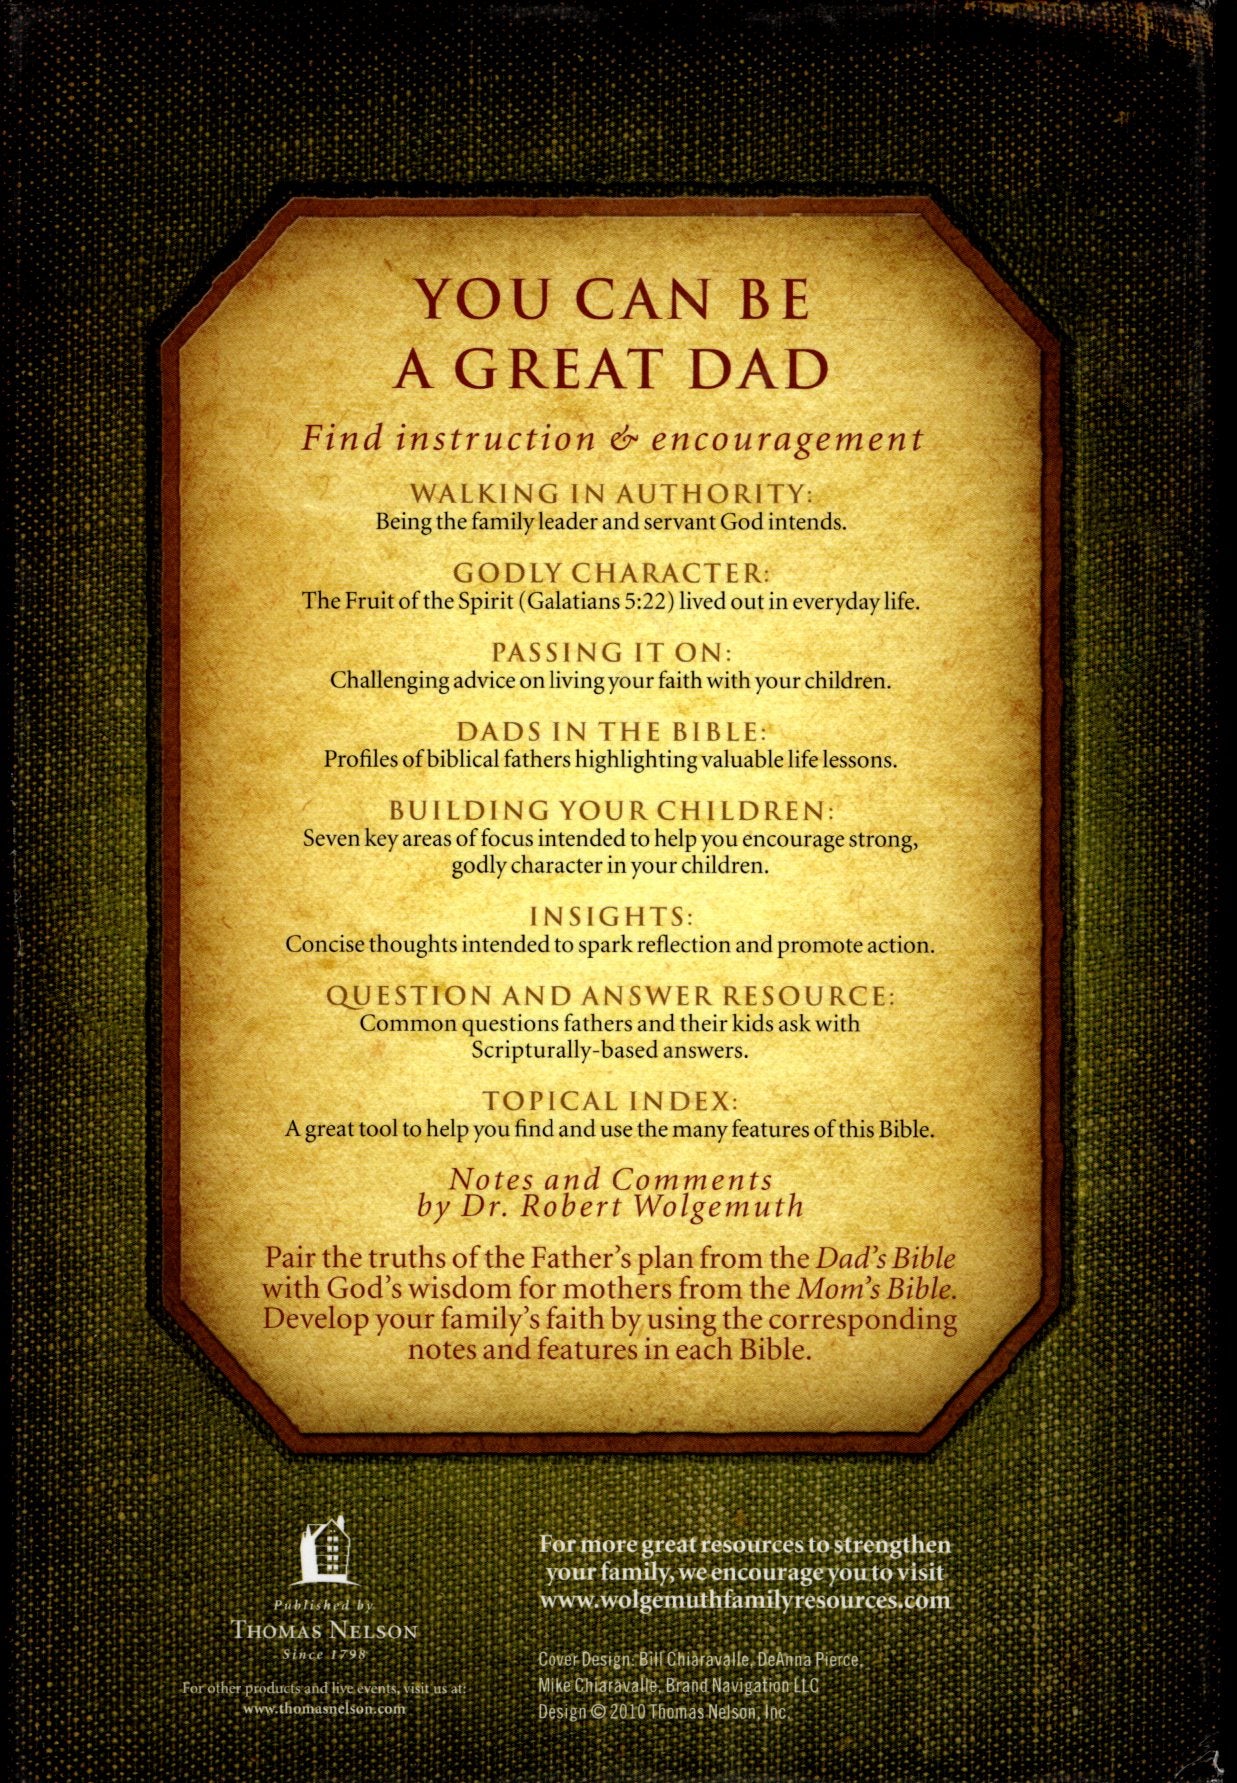 Thomas Nelson NCV™ Dad's Bible: The Father's Plan - Notes by Robert Wolgemuth